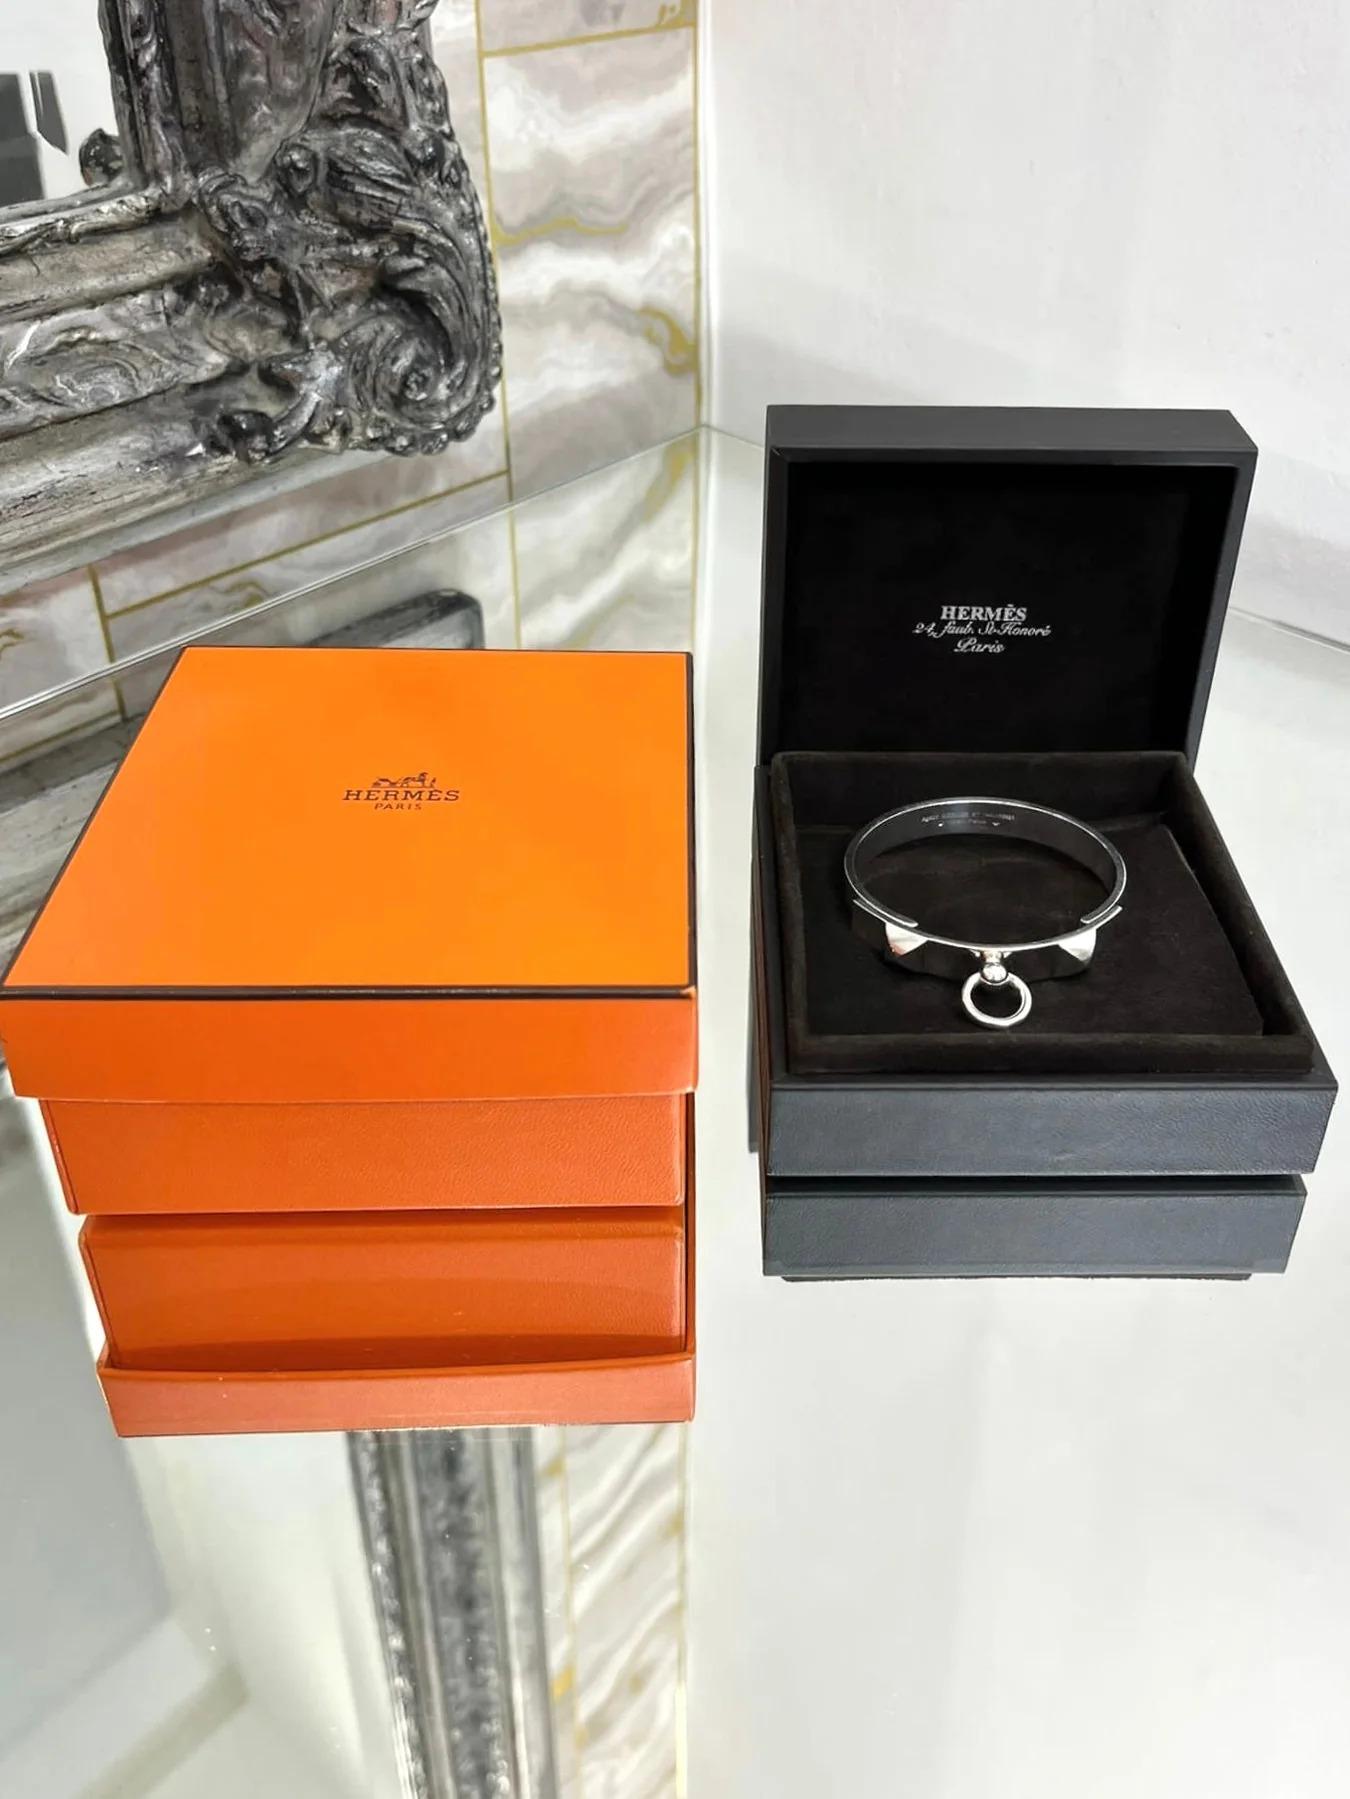 Hermes Collier De Chien Sterling Silver Bracelet

Iconic Medor design, slimmer version/small model.

Additional information:
Size – One Size
Composition – 925 Sterling Silver
Condition – Good ( Some scratches)
Comes with- Outer Box, Inner Box, Dust